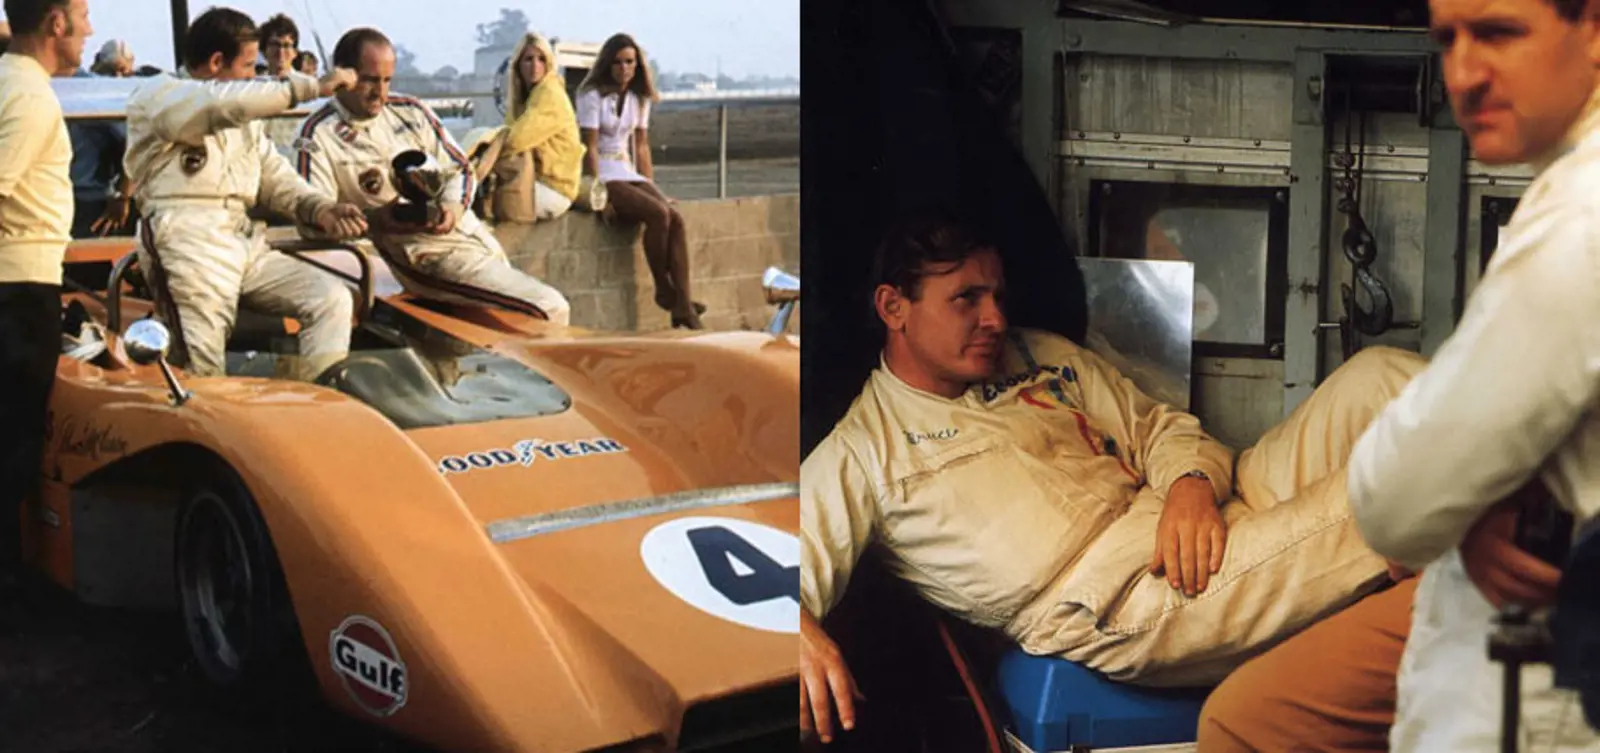 Tragedy At Goodwood - McLaren's DNA and Heritage